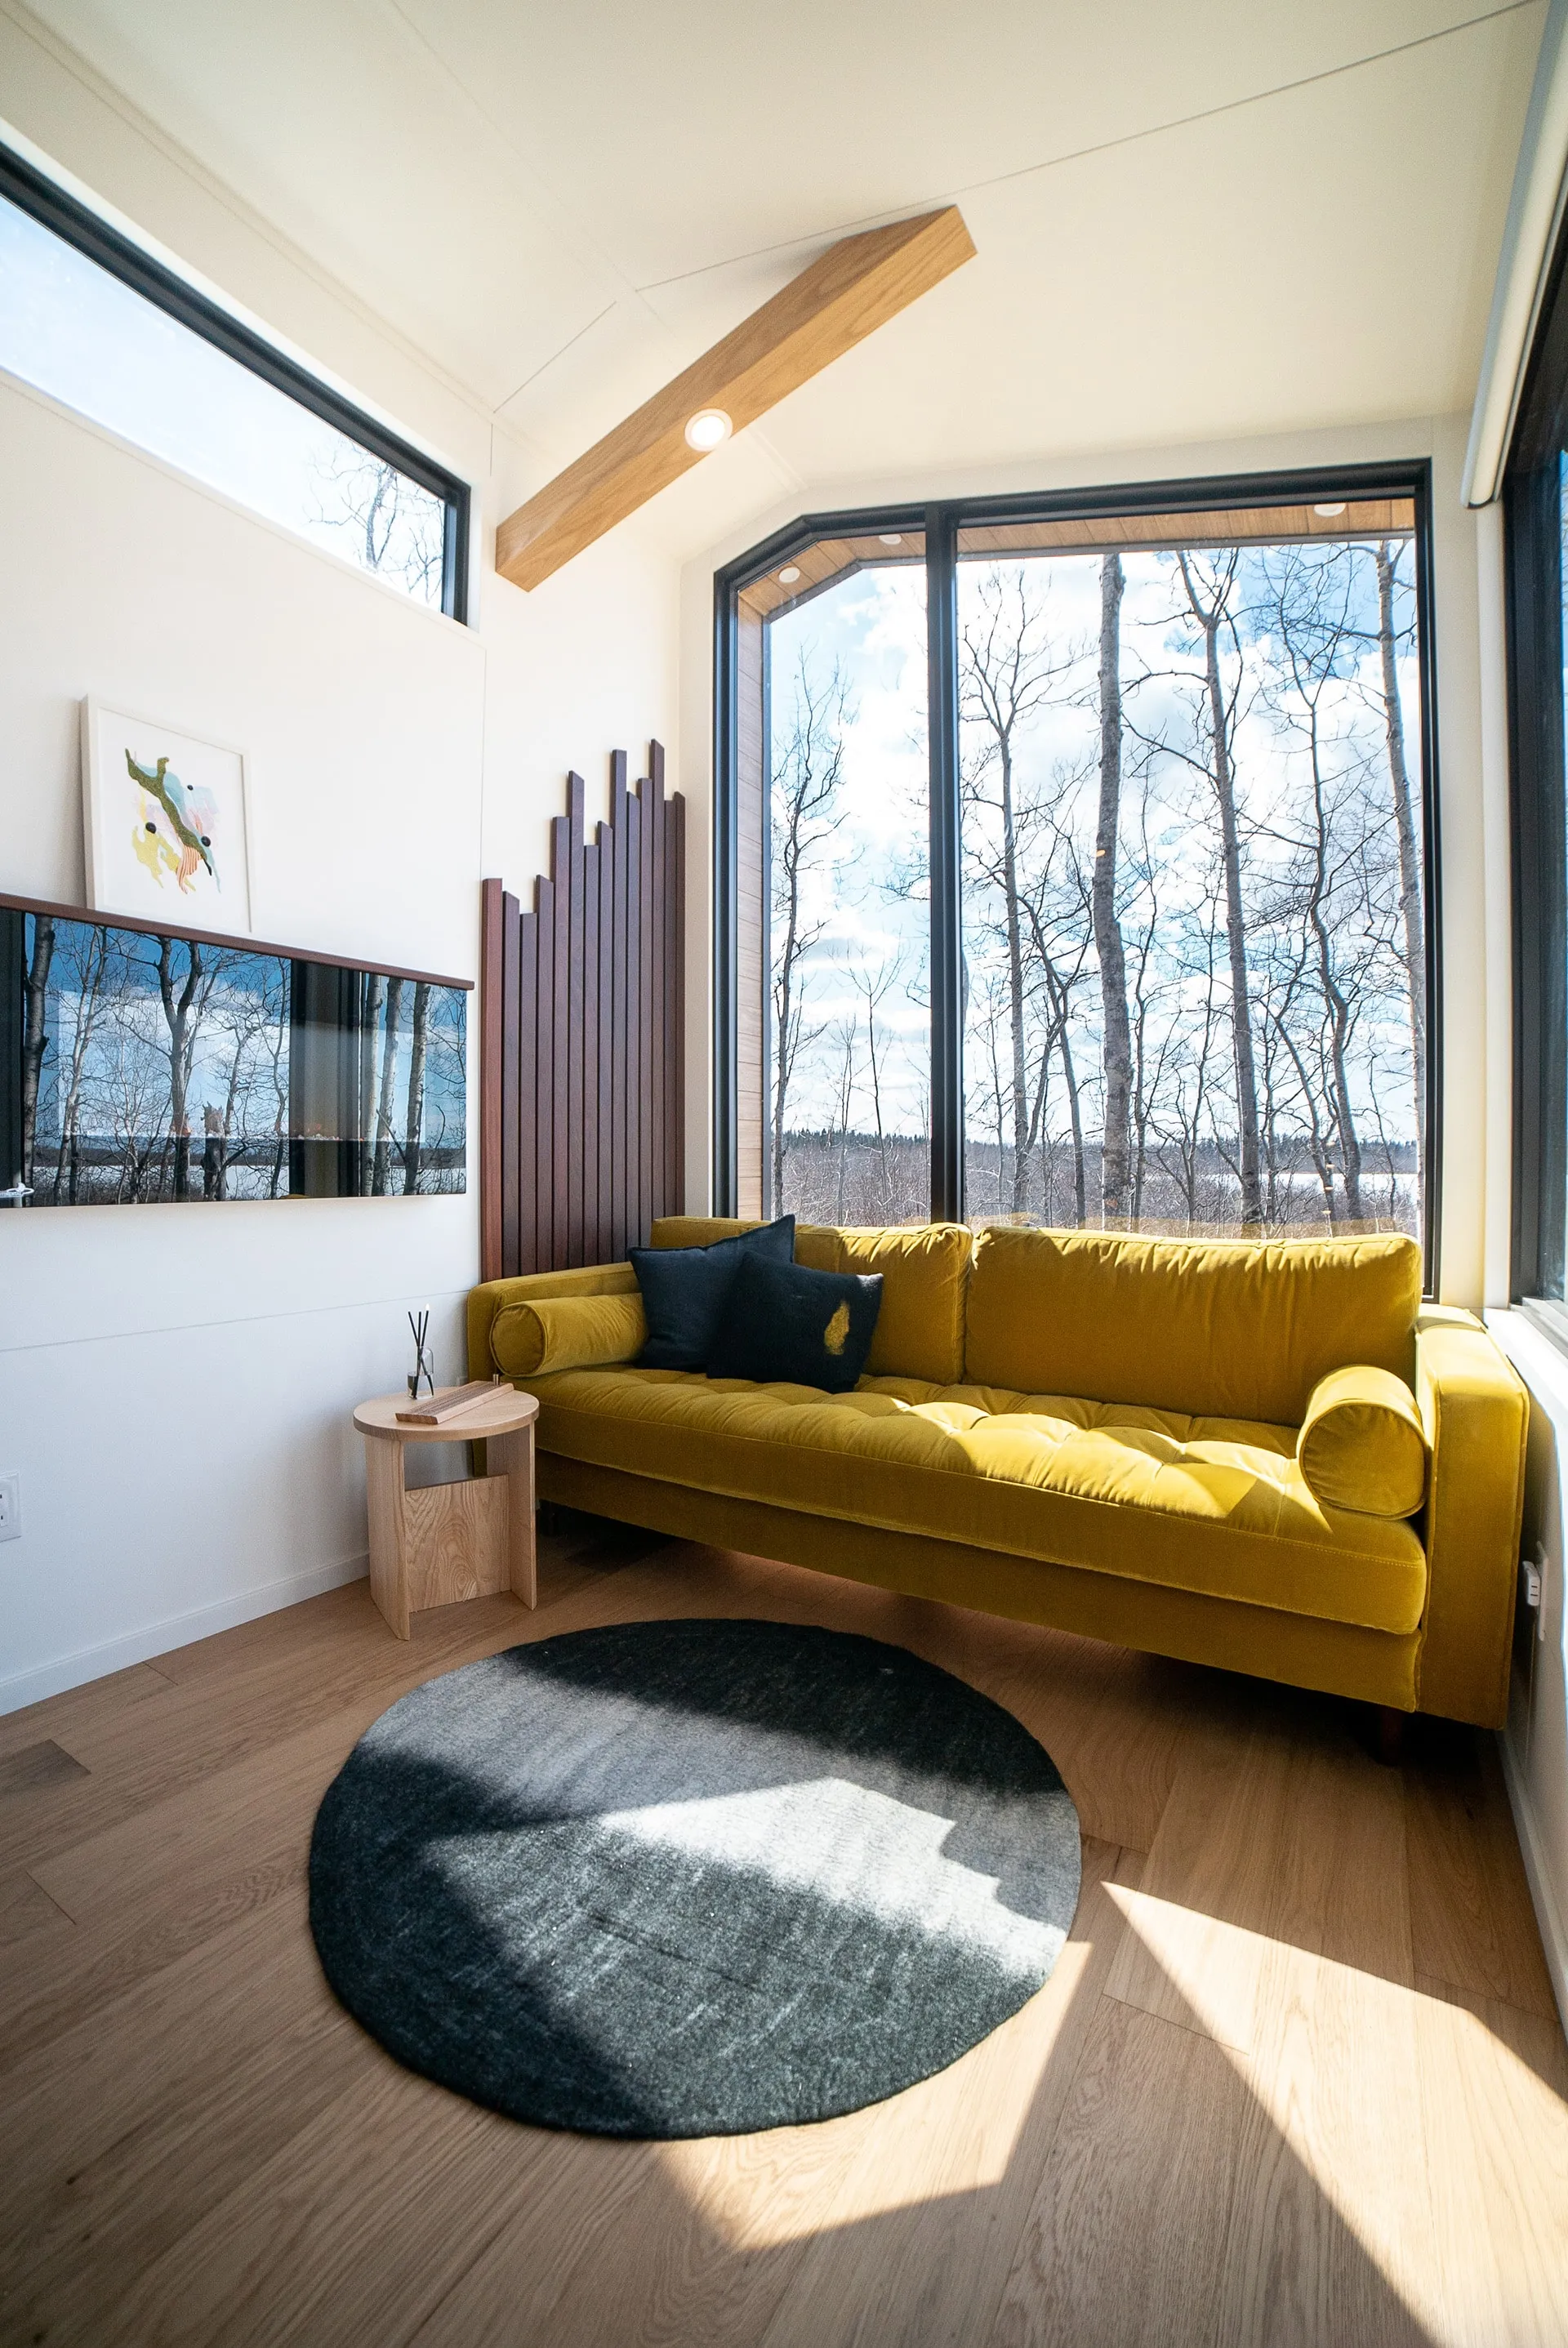 Angled view of Aqua tiny homes living room space with yellow double couch, floating fireplace, feature slat wall and large angled windows